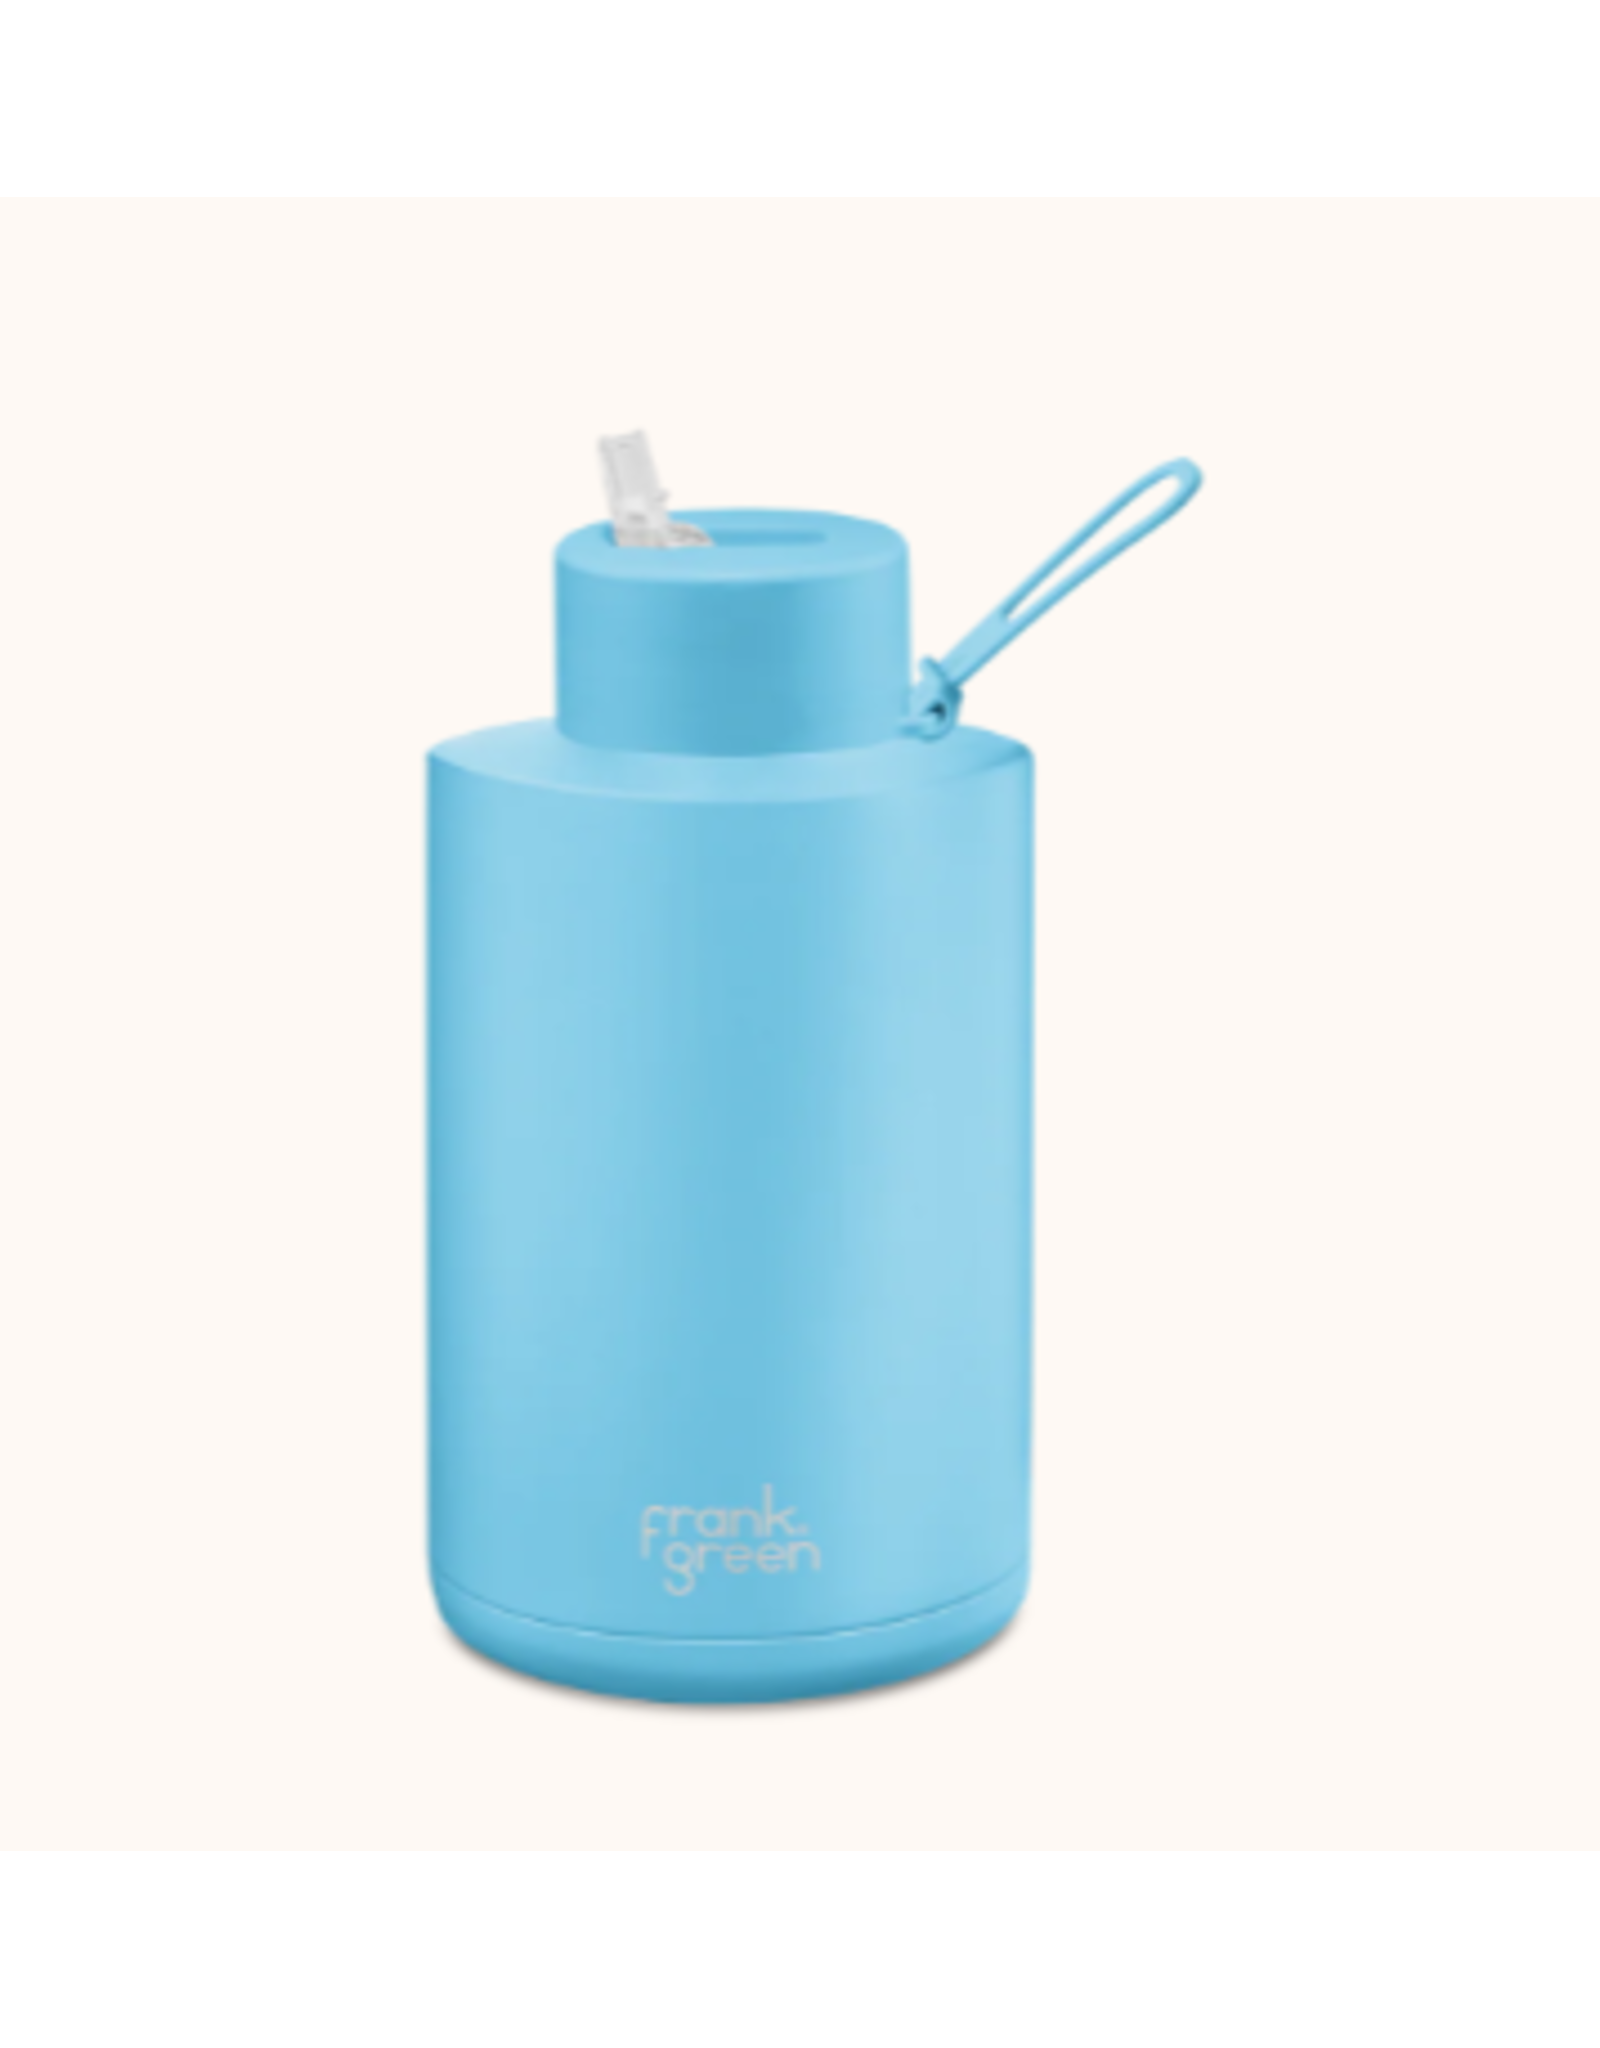 68oz Stainless Steel Ceramic Reusable Bottle with Straw - Sky Blue